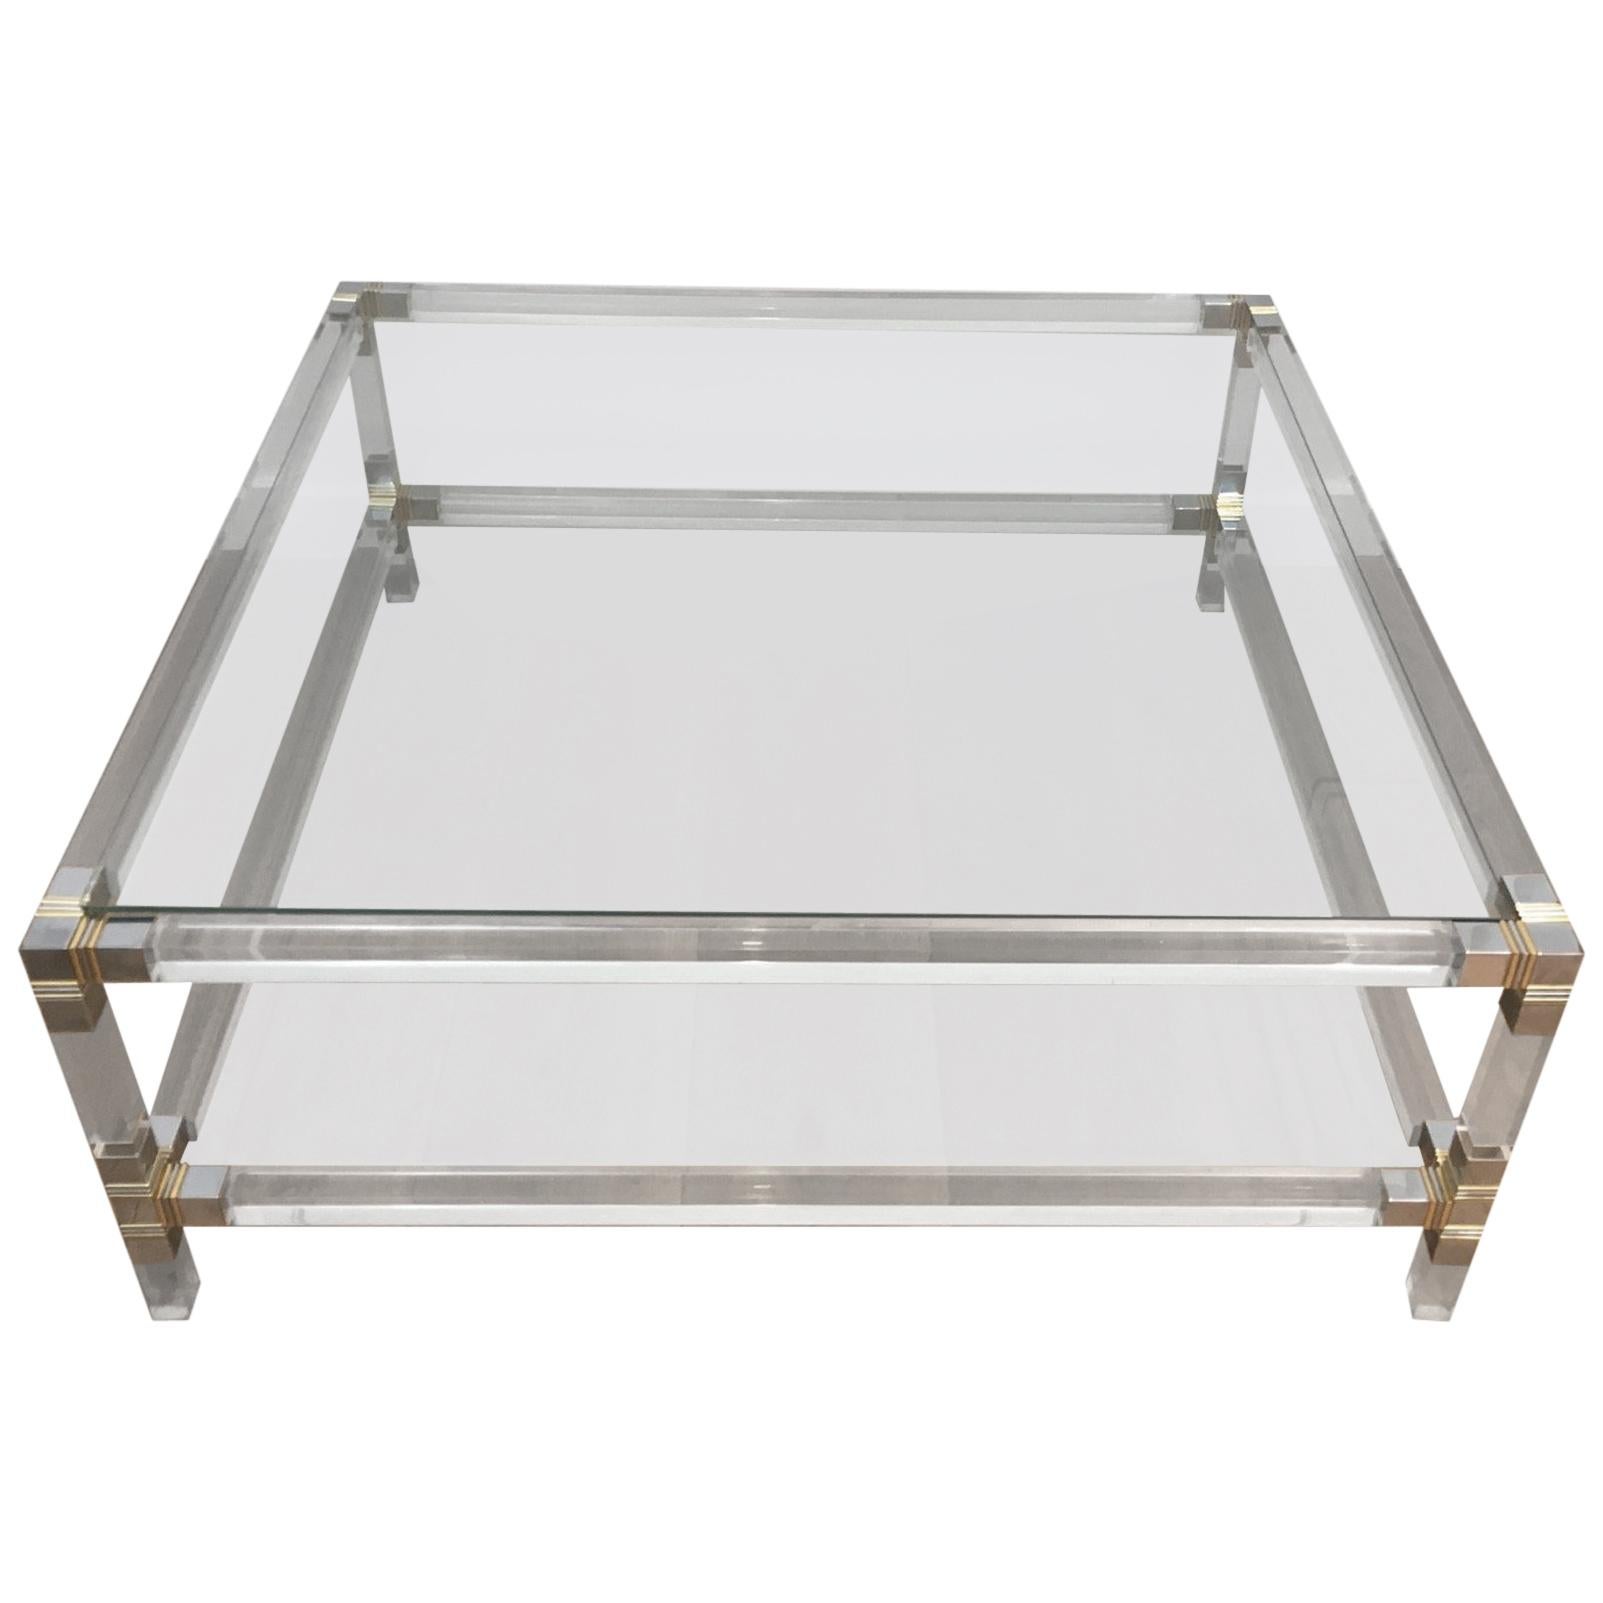 Square Lucite Coffee Table with Chrome Corners and Glass Tops